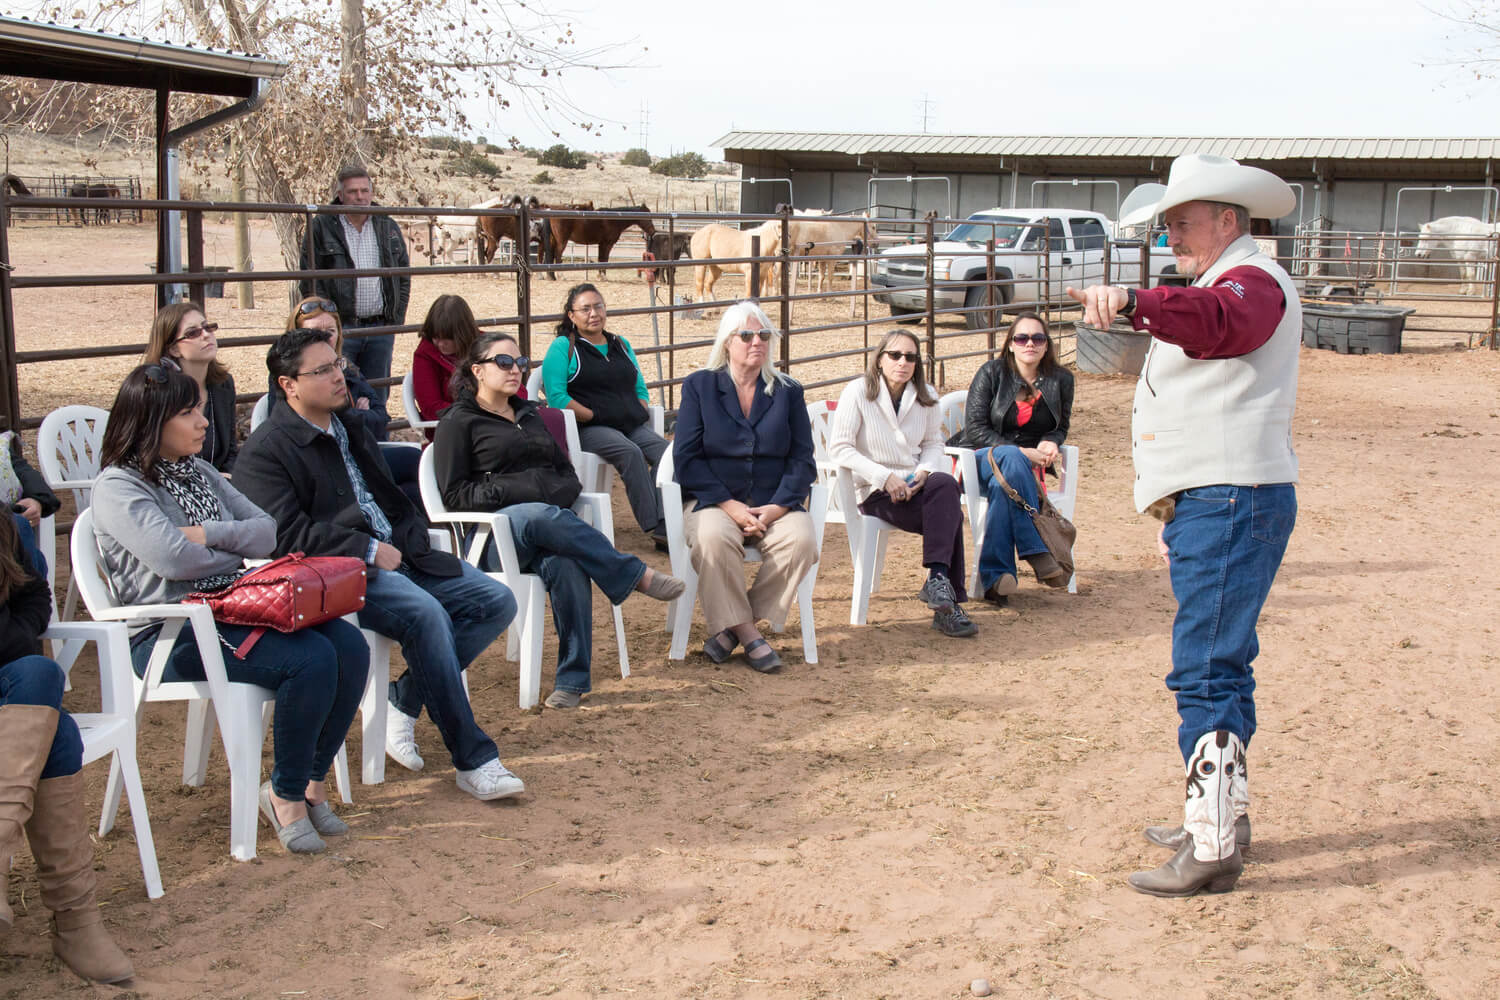 A man wearing a cowboy hat speaks to a small group of people outdoors